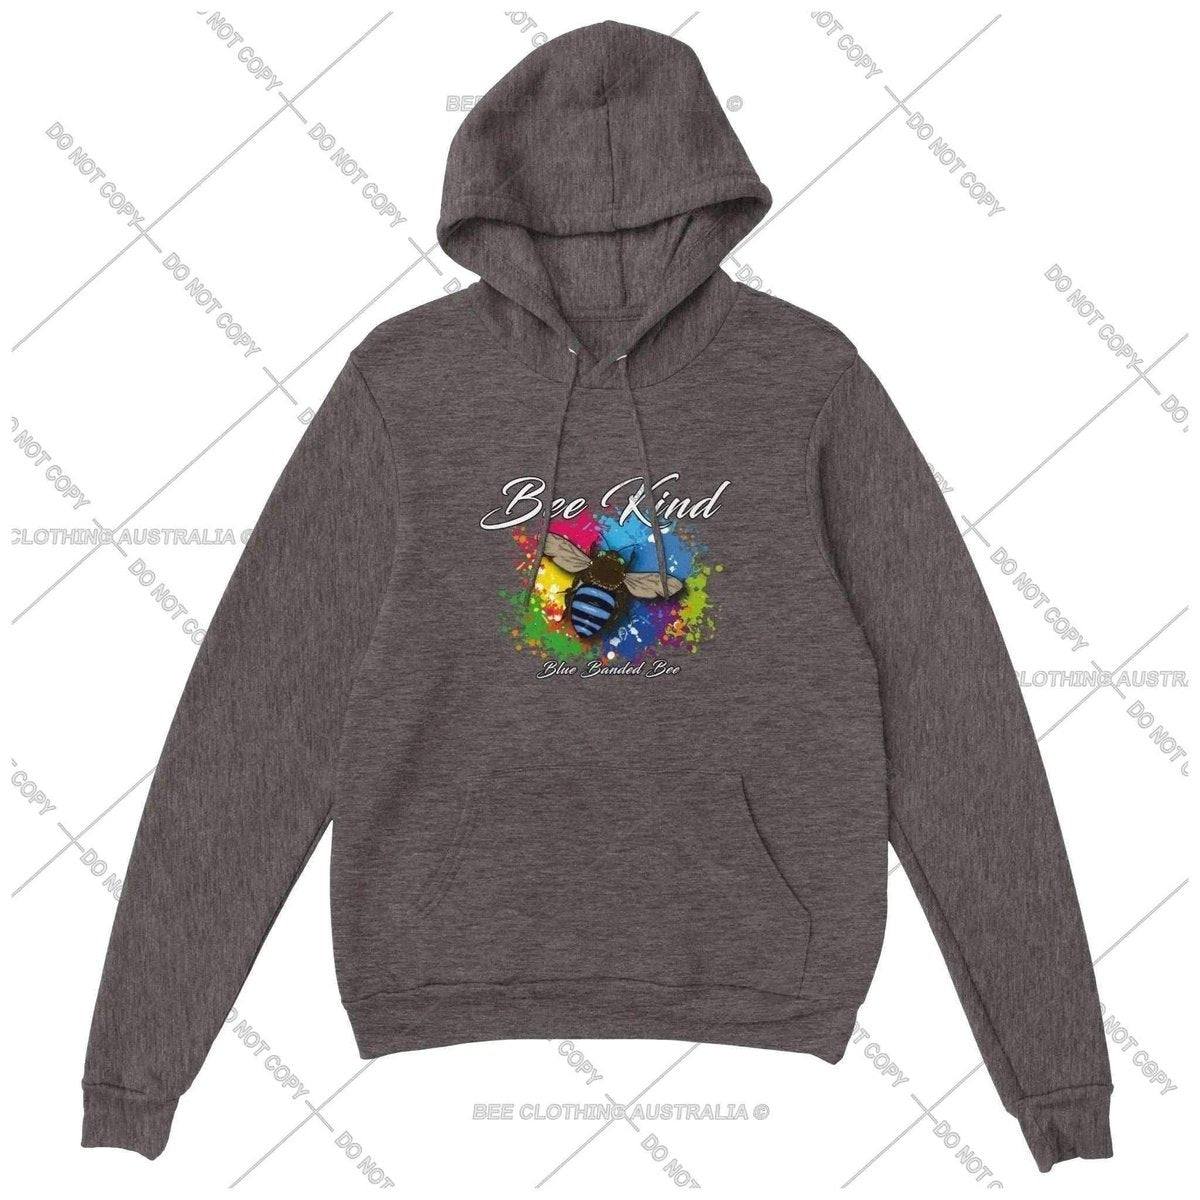 Bee Kind - Blue Banded Bee -  Native Bee Premium Unisex Pullover Hoodie Adults Pullover Hoodie Charcoal Heather / XS Bee Clothing Australia